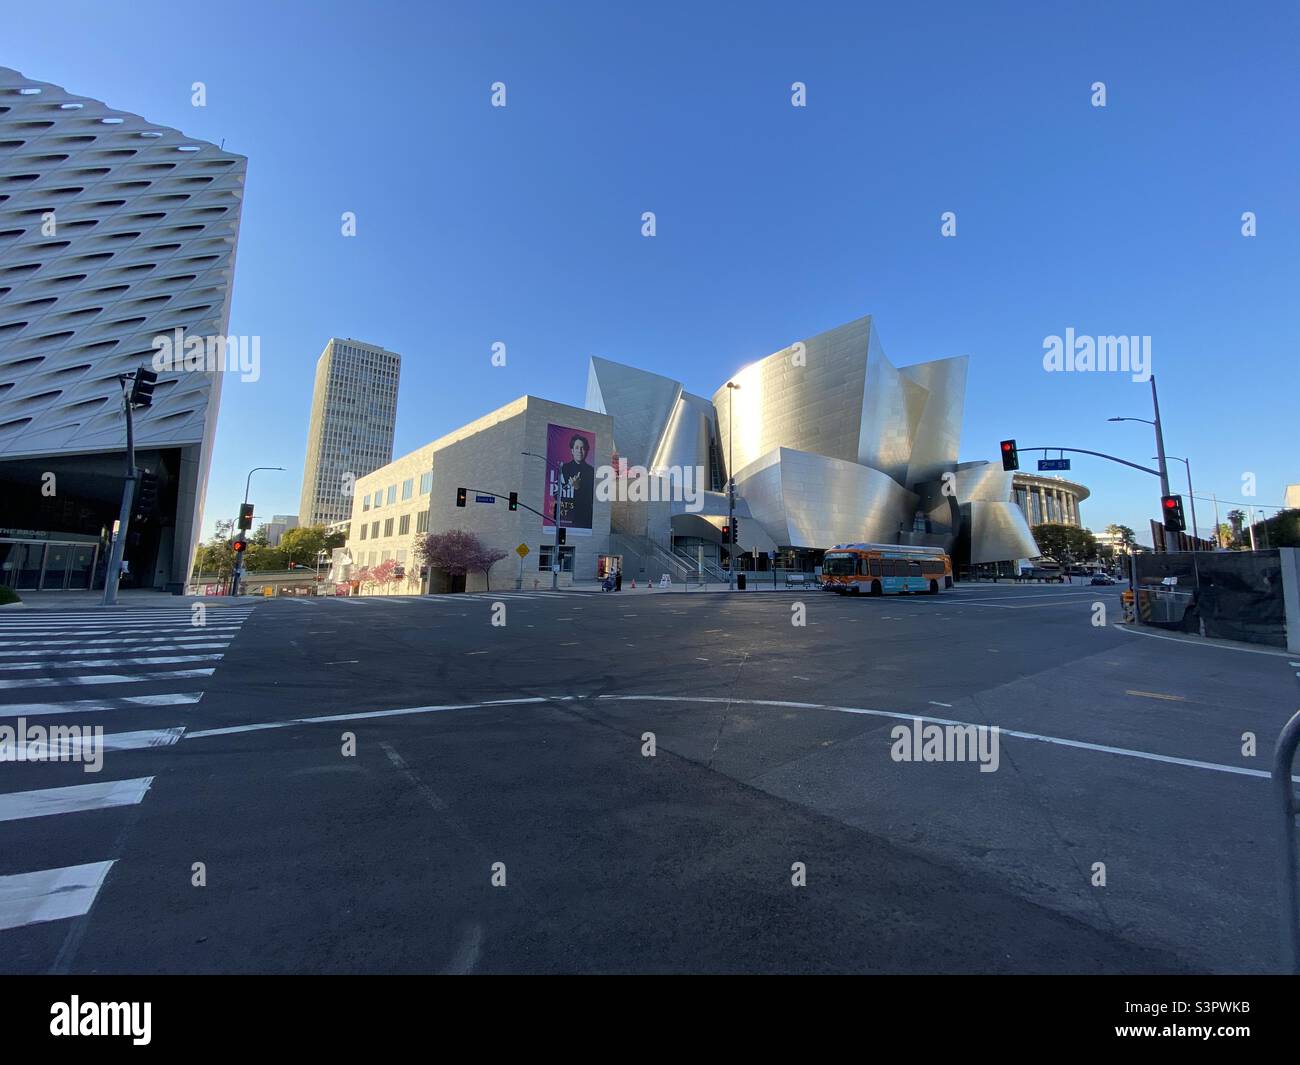 LOS ANGELES, CA, MAR 2021: orange LA Metro bus passes in front of the Walt Disney Concert Hall, designed by Frank Gehry and home to the LA Philharmonic in Downtown Stock Photo